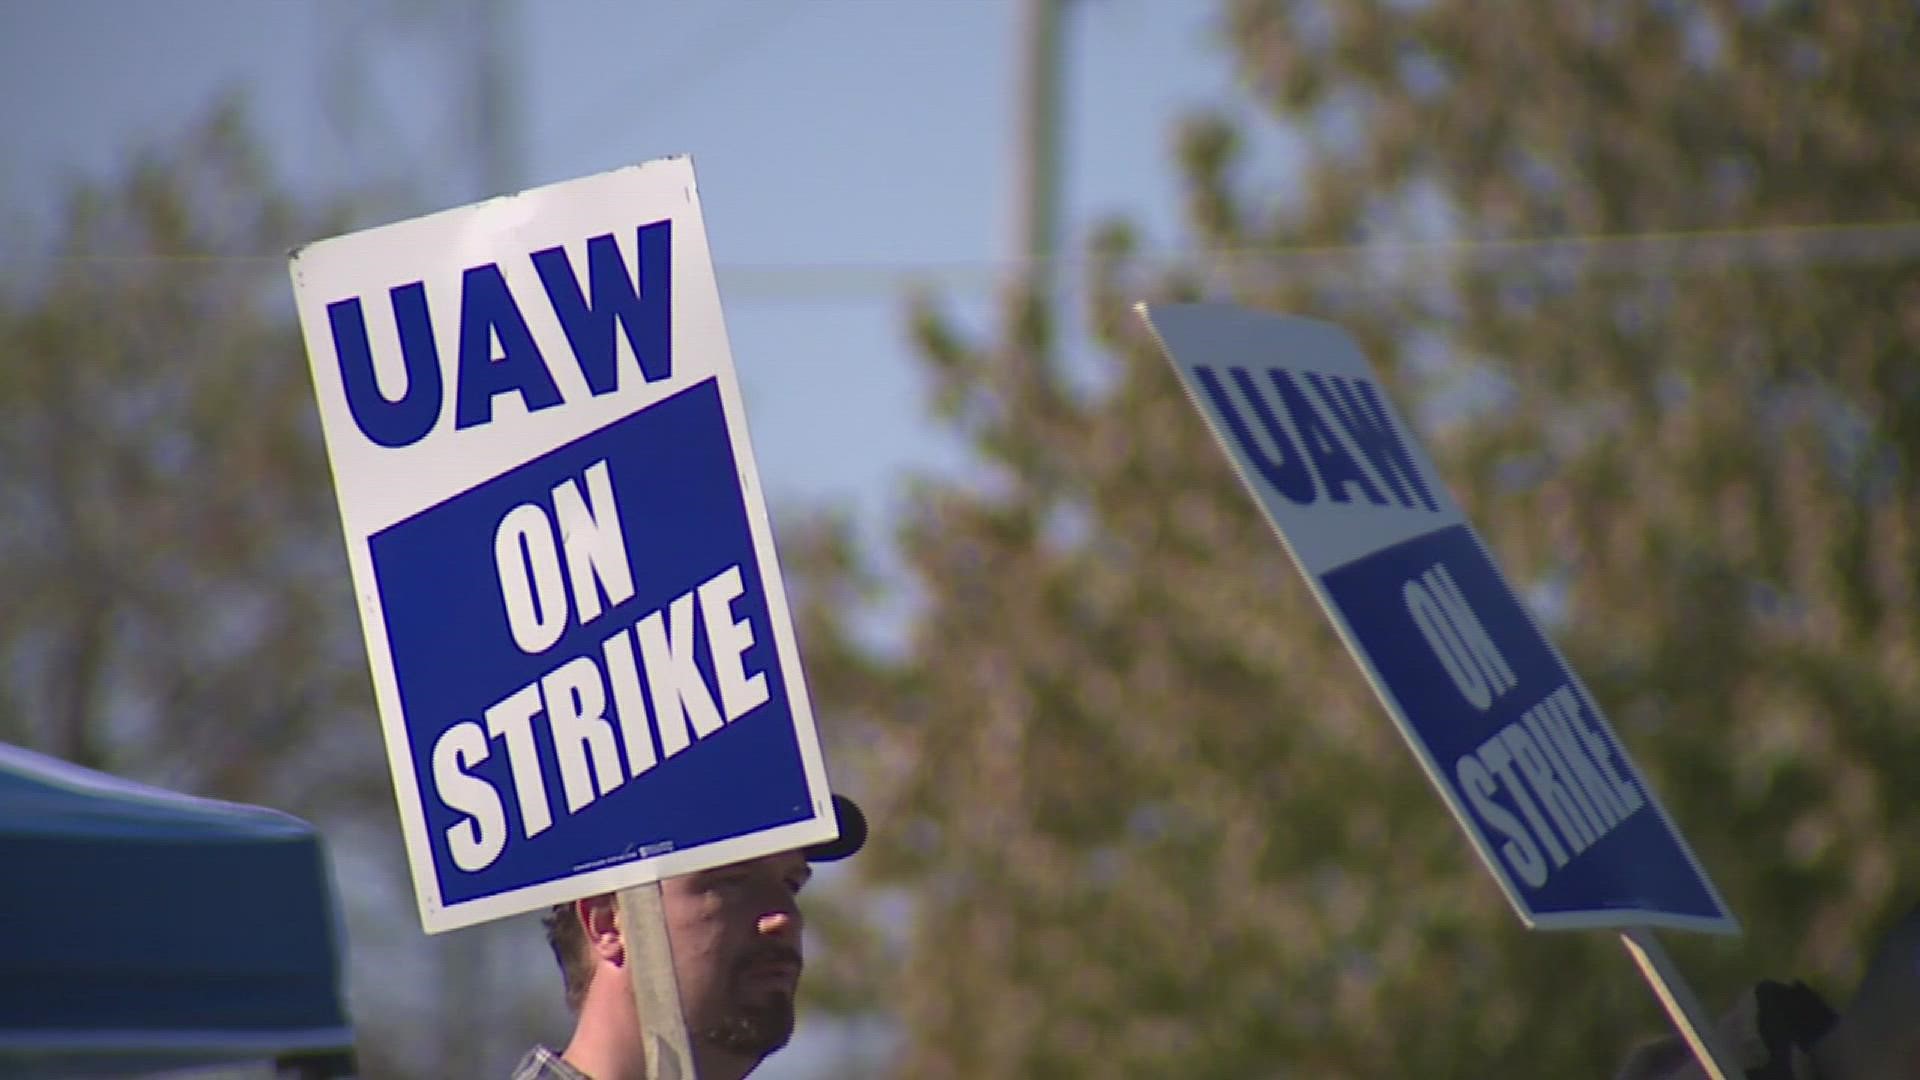 Union members receive $275 a week, but aren't allowed to file for unemployment or find another job that pays more than strike pay.